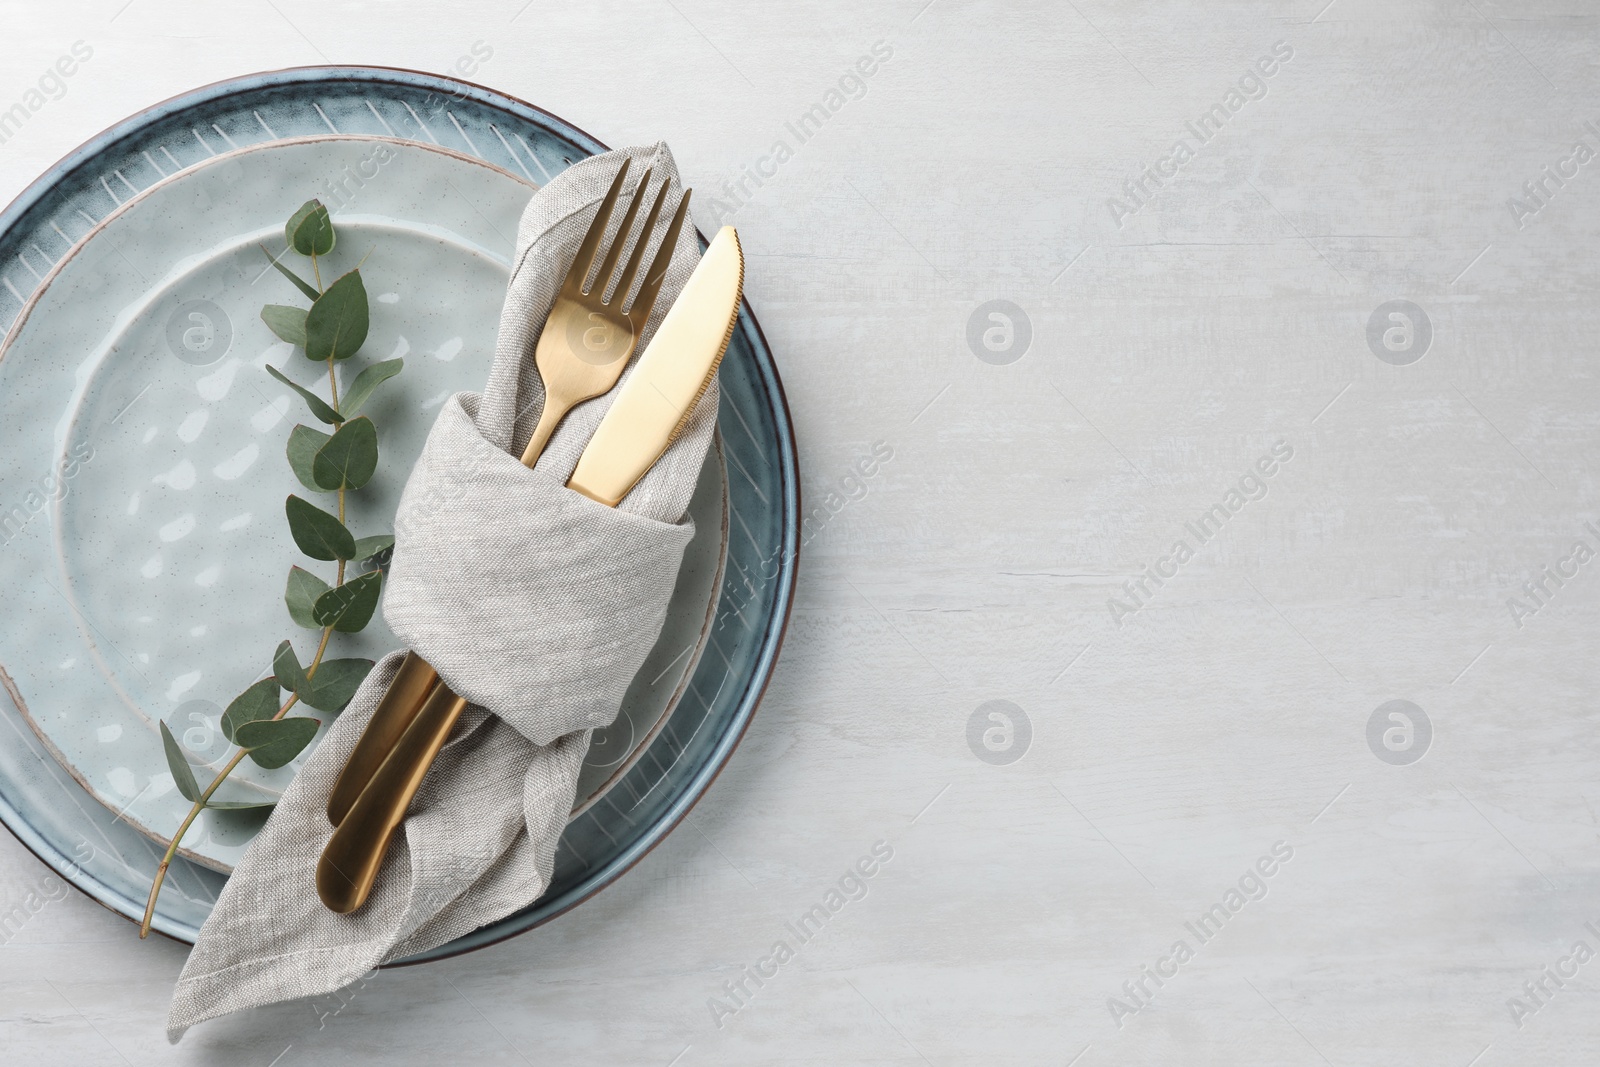 Photo of Stylish setting with cutlery, napkin, eucalyptus branch and plates on white table, top view. Space for text